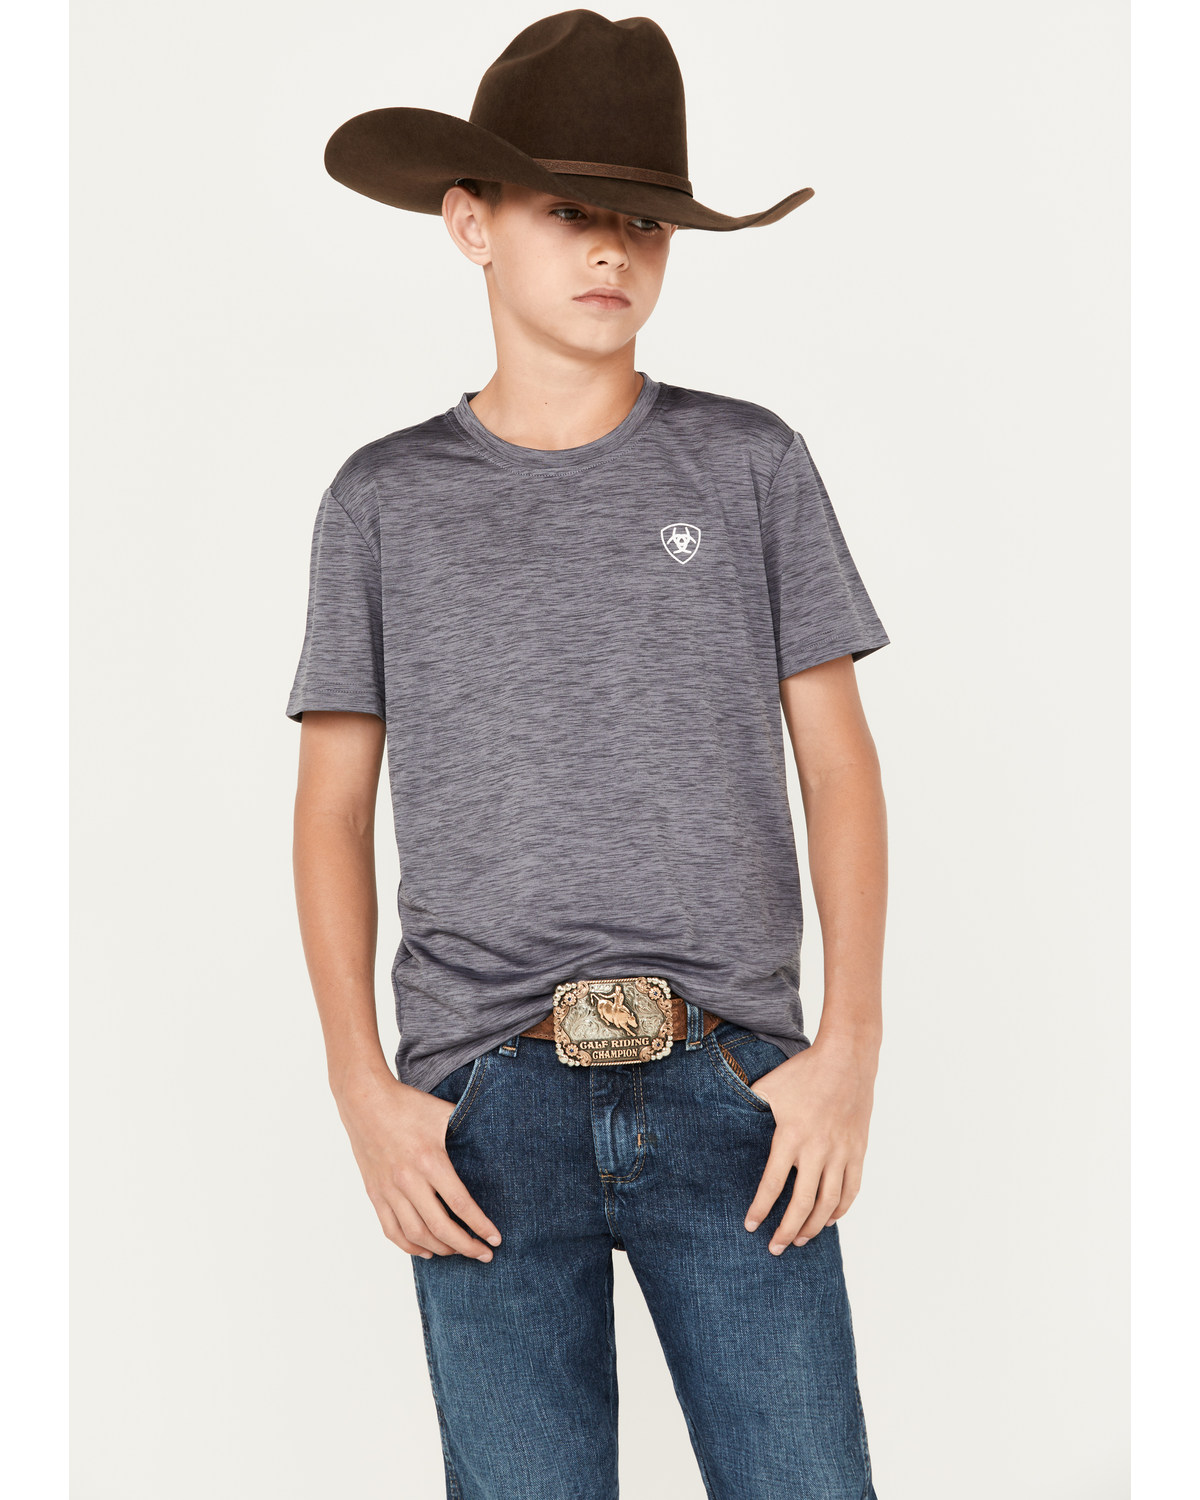 Ariat Boys' Charger Seal Short Sleeve Graphic T-Shirt